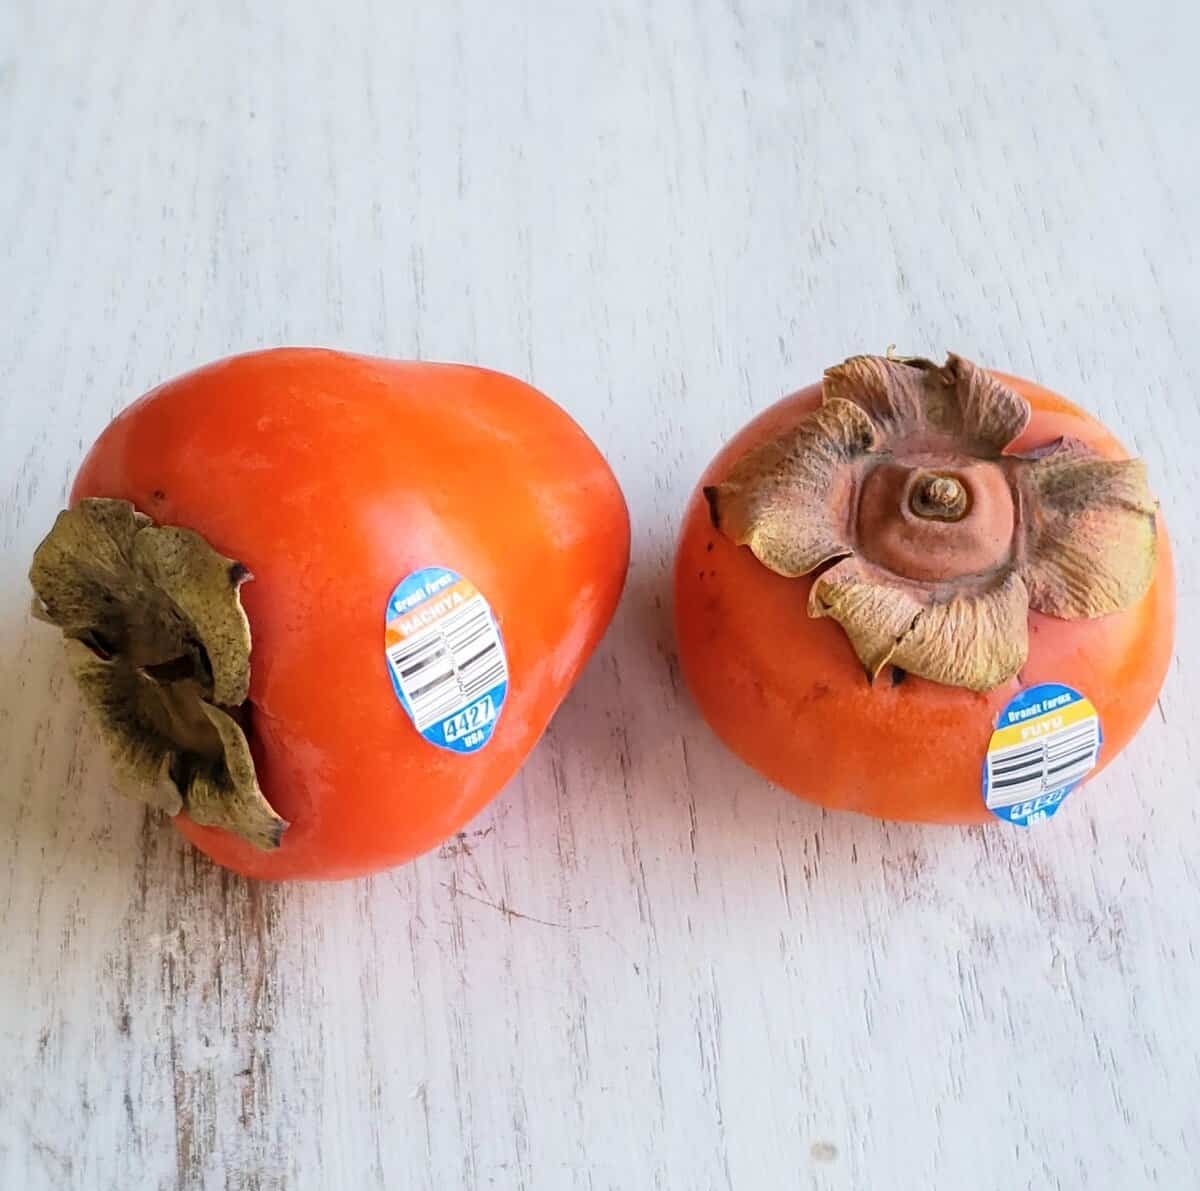 Two kinds of persimmons with labels on them on white surface.h